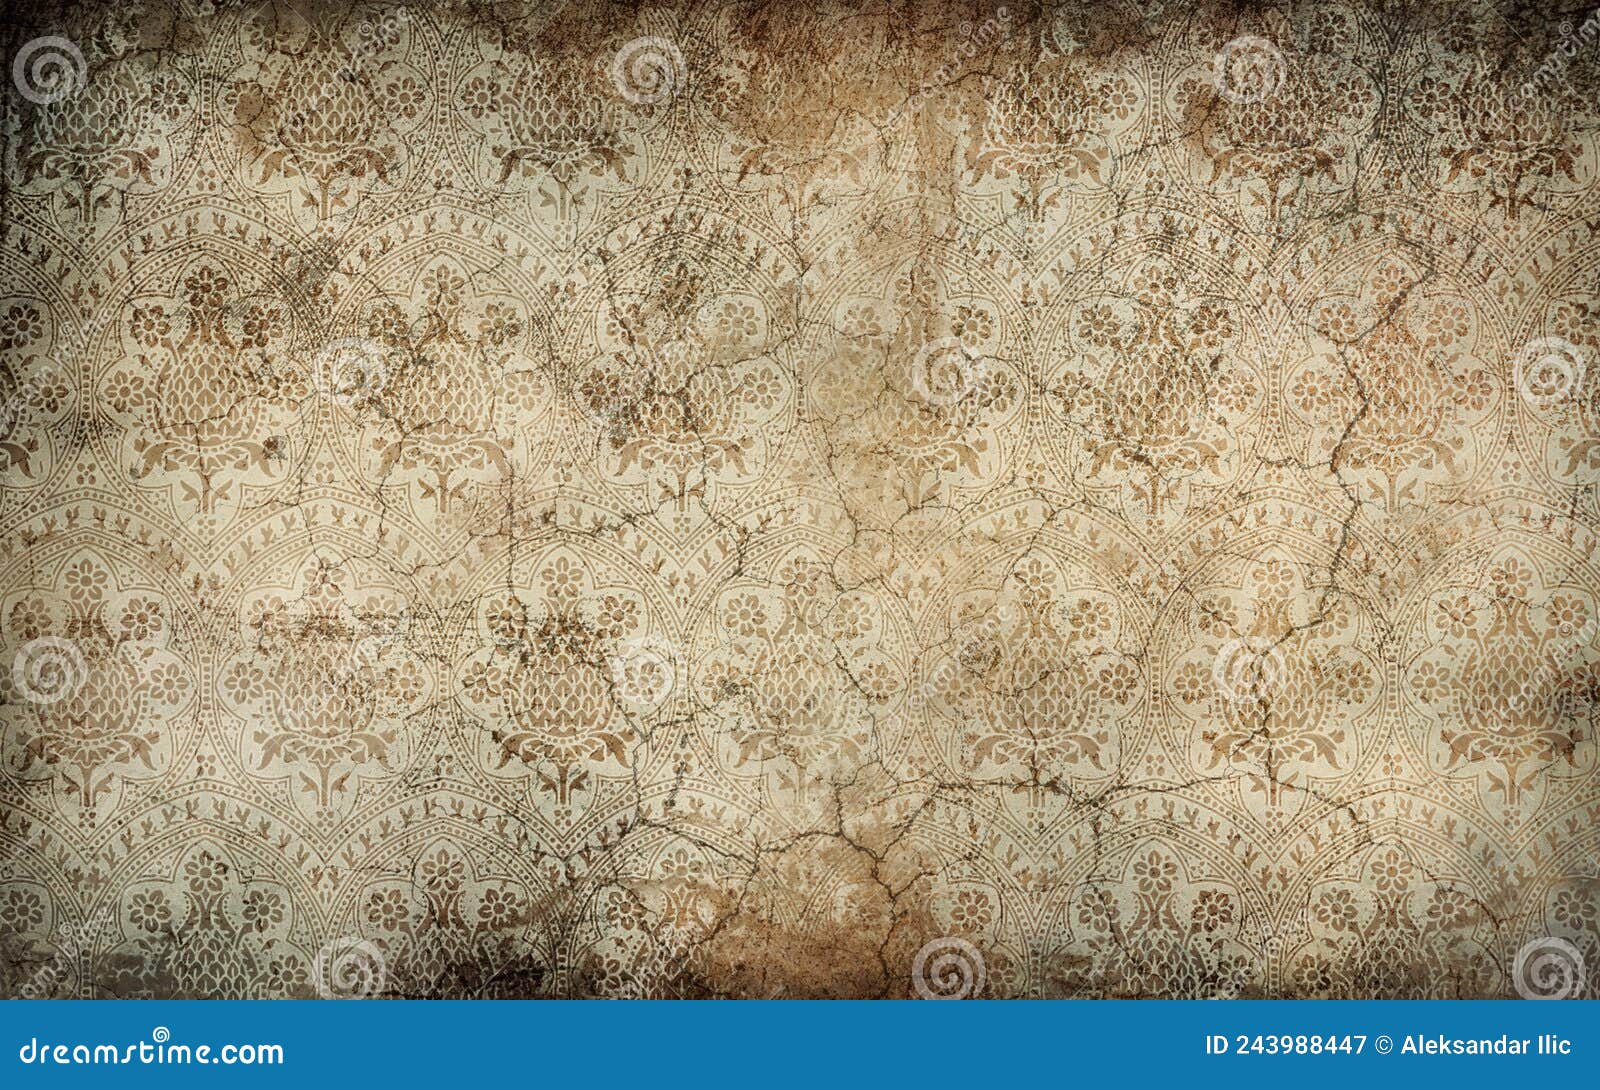 worn wallpaper with floral patterns on dirty, cracked wall. backgrouds and textures. copy space, add text